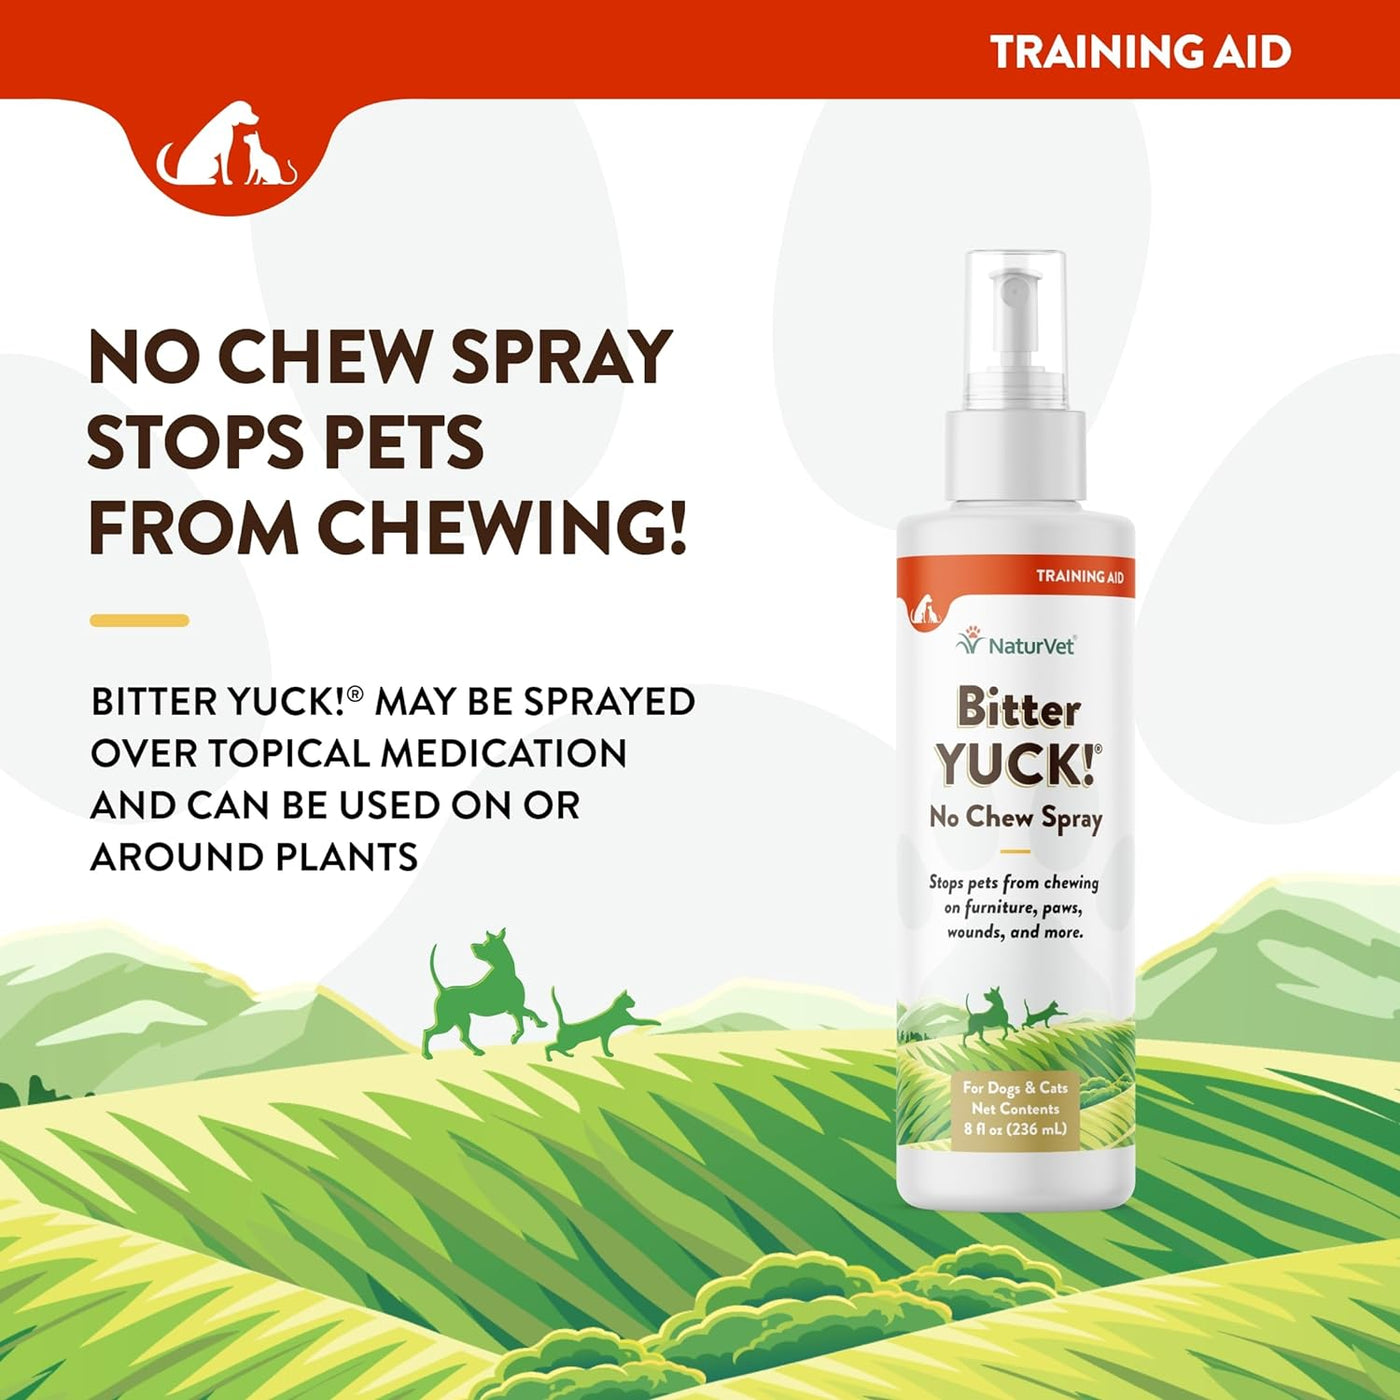 NaturVet - Bitter YUCK! No Chew Spray for Dogs & Cats